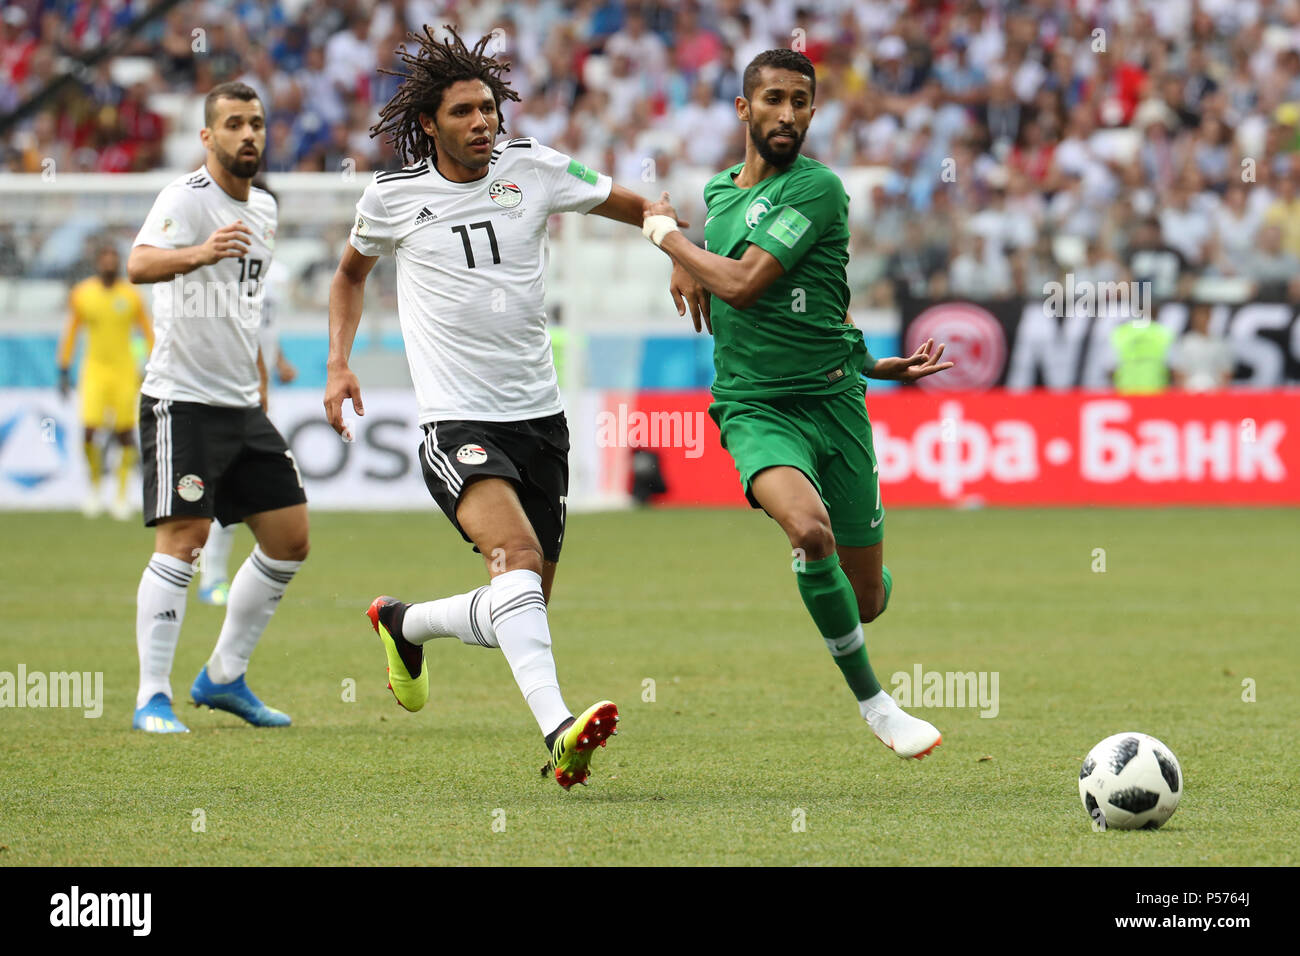 Volgograd, Russia. 25th June, 2018. Egypt's Mohamed Elneny (L) battles for the ball with Saudi Arabia's Salman Al-Faraj (C) during the FIFA World Cup 2018 Group A soccer match between Saudi Arabia and Egypt at the Volgograd Arena in Volgograd, Russia, 25 June 2018. Credit: Ahmed Ramadan/dpa/Alamy Live News Stock Photo